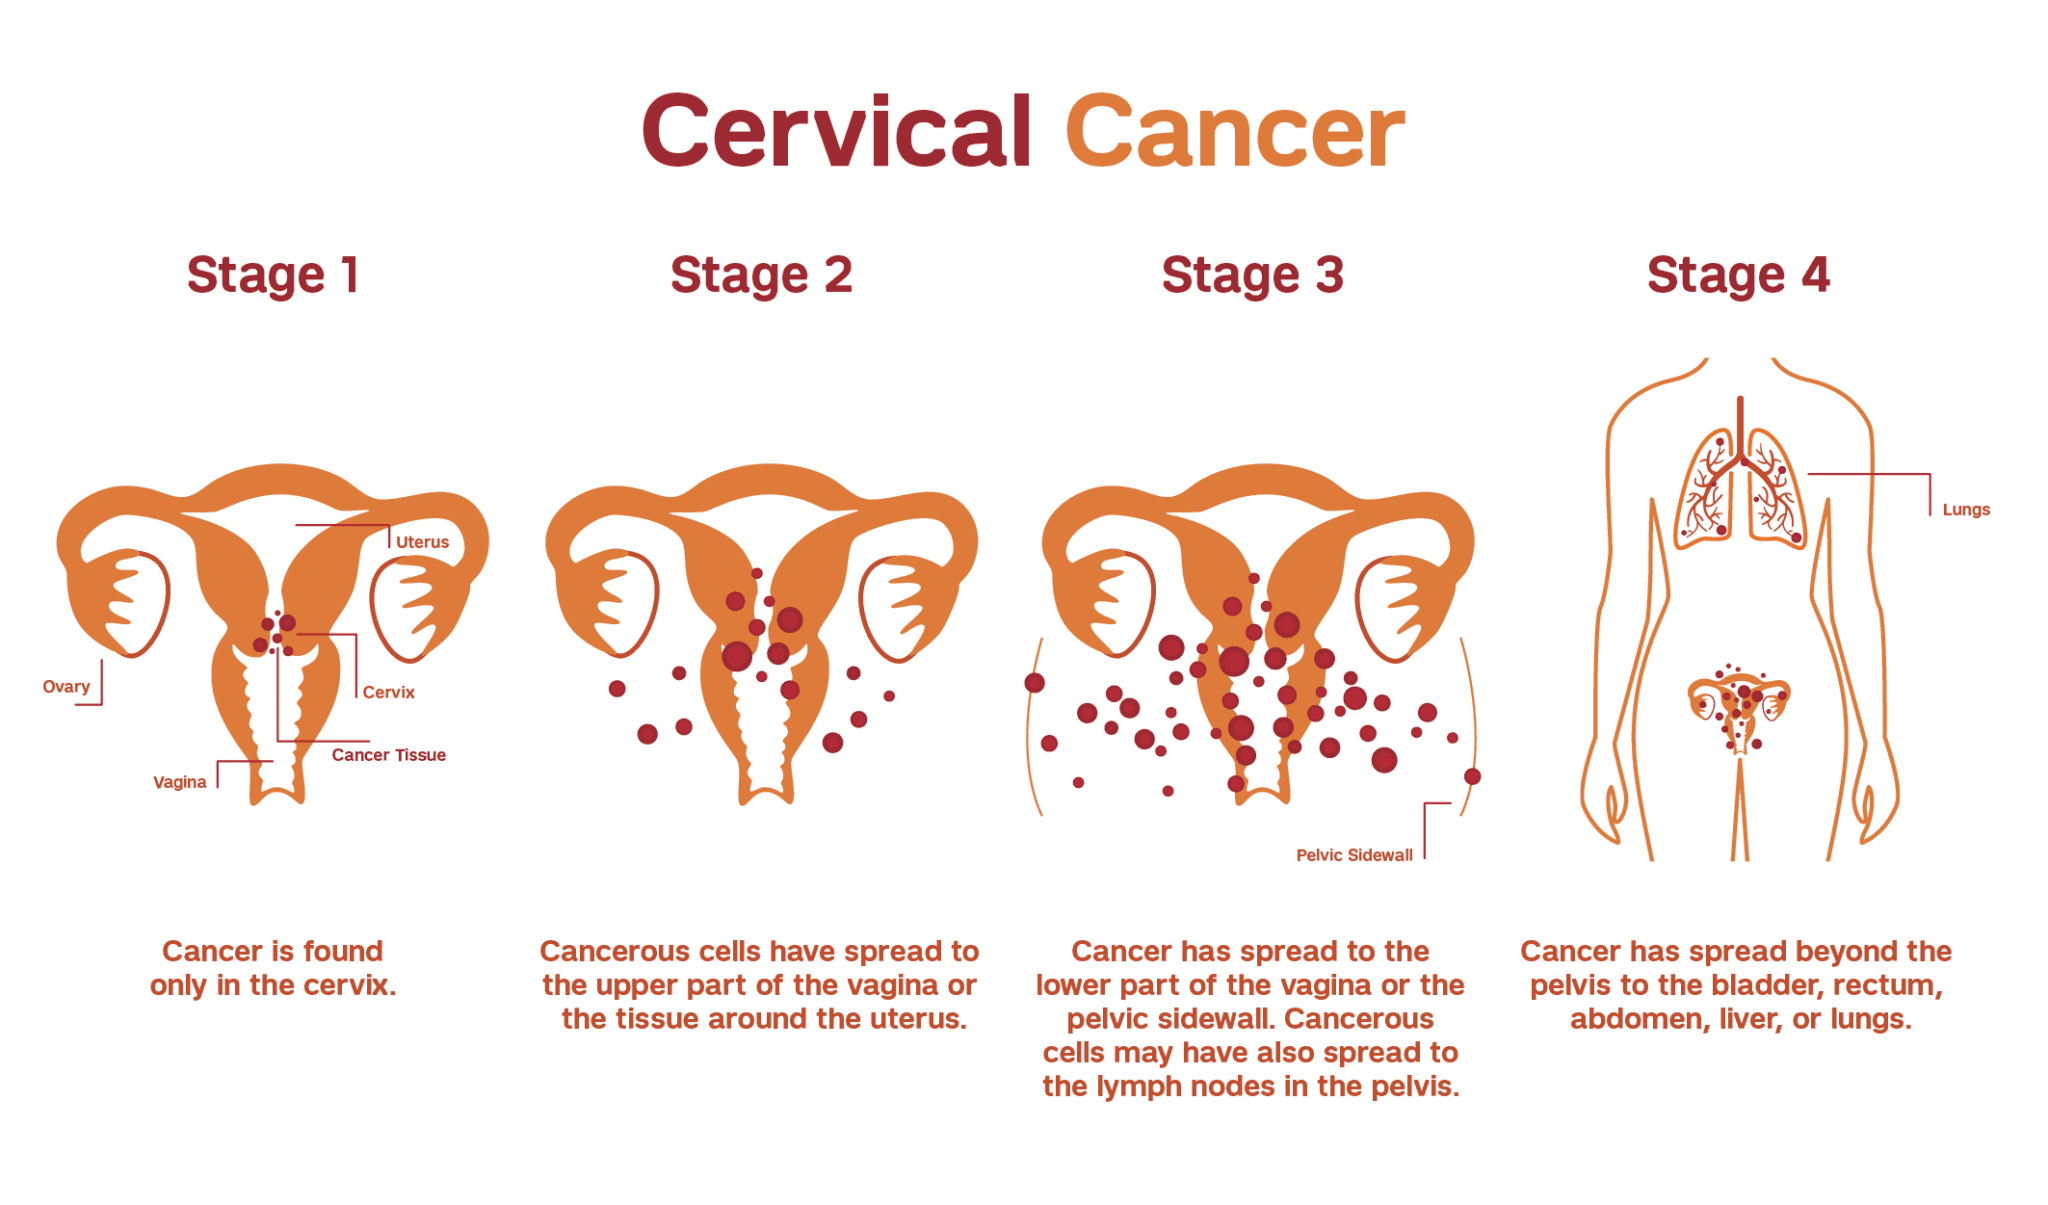 treatment-of-cervical-cancer-best-homeopathy-doctor-in-india-us